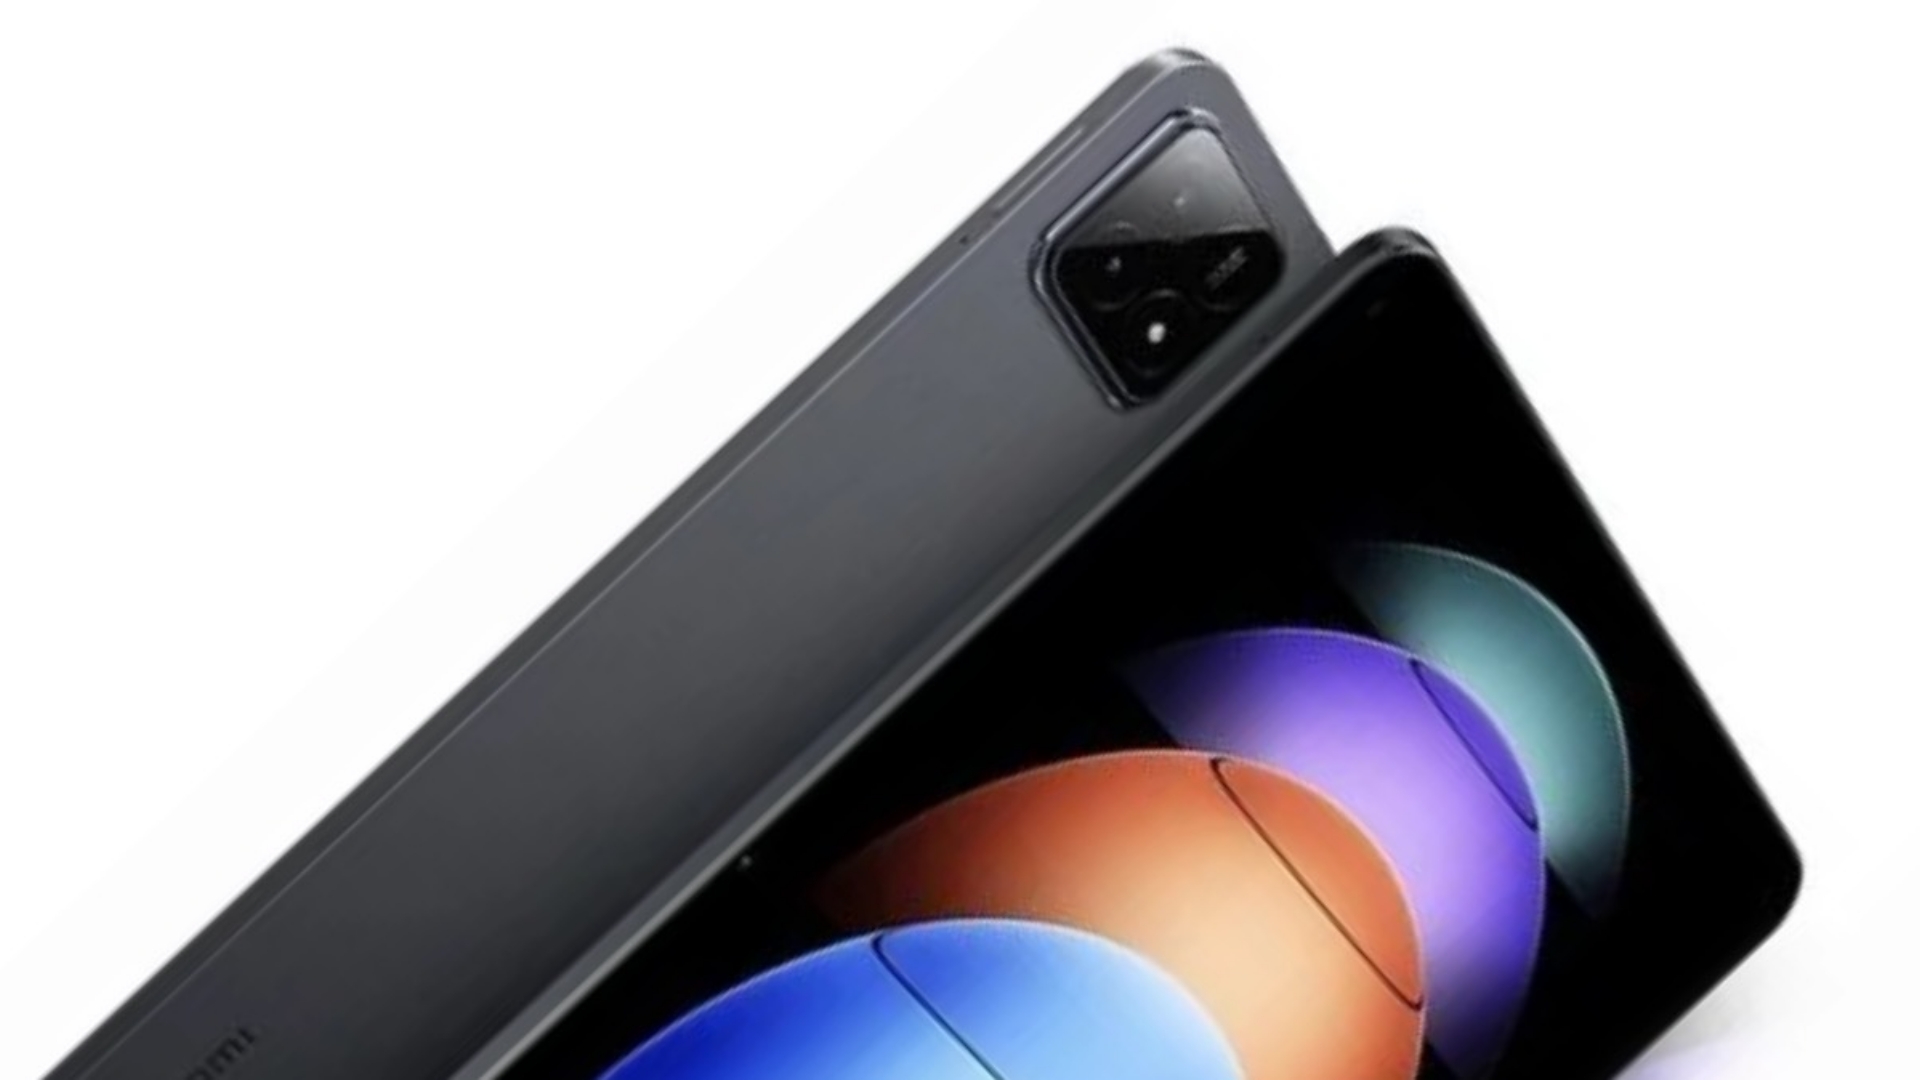 Prior to release, the image, primary specs, and launch schedule for the Xiaomi Pad 6S Pro were leaked.